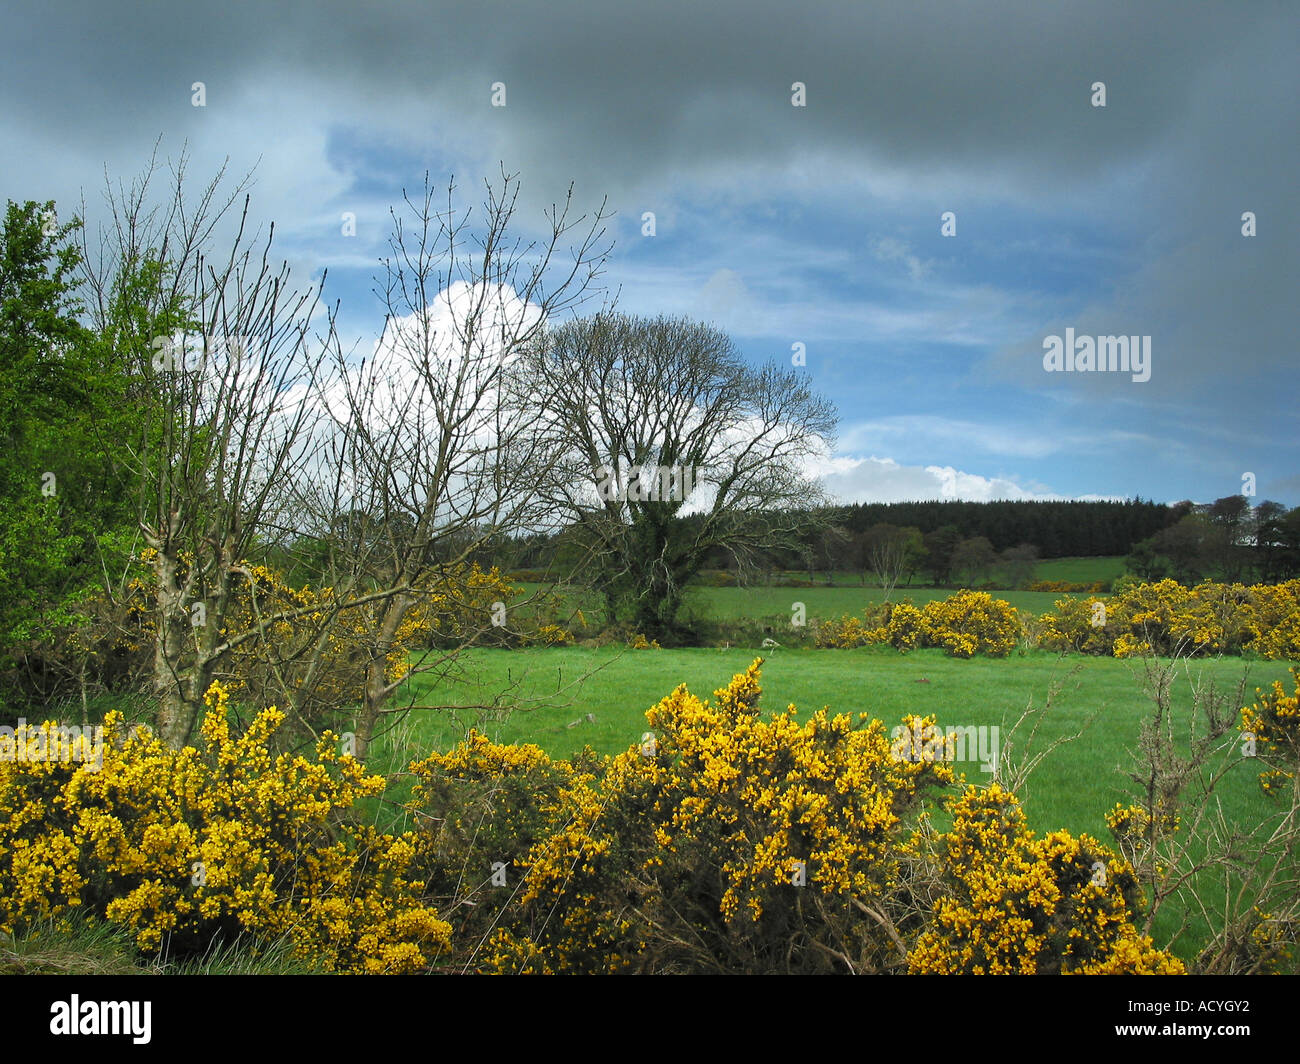 field in Wicklow Mountains near Dublin Ireland under stormy sky and with yellow Scotch Broom flowering Stock Photo